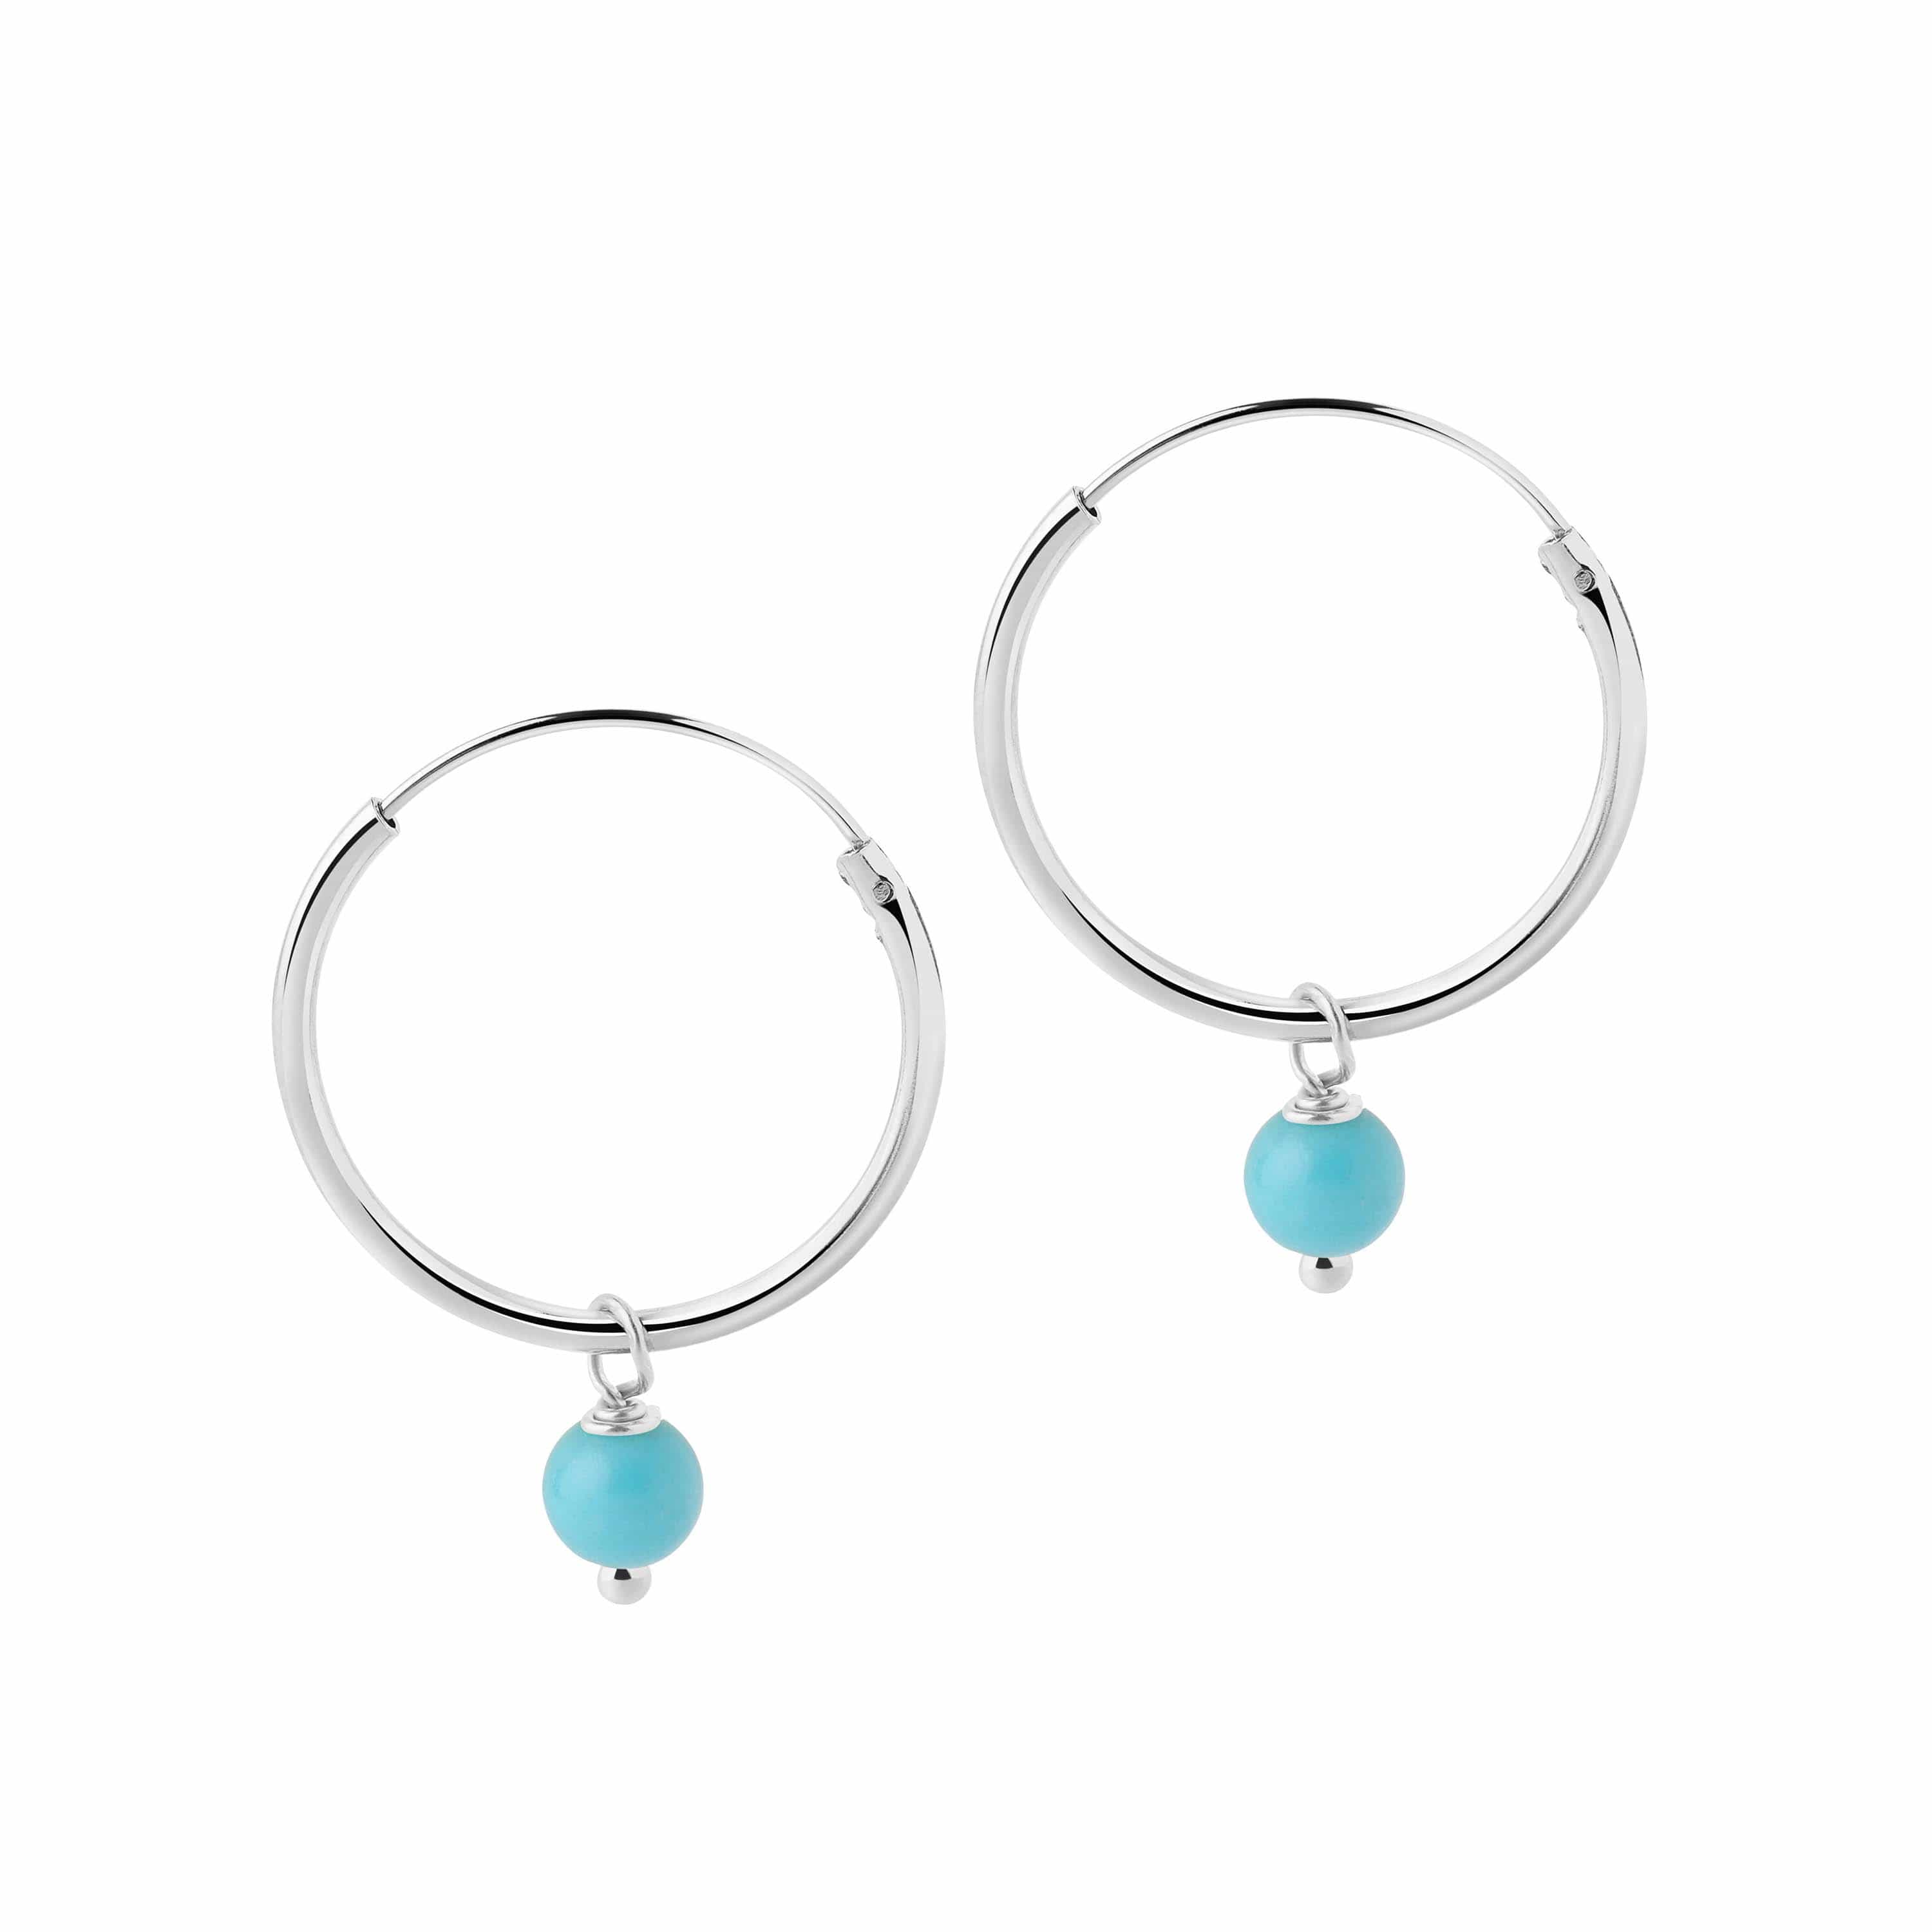 Medium Gold Plated Hoop Earrings with Turquoise Blue Stone